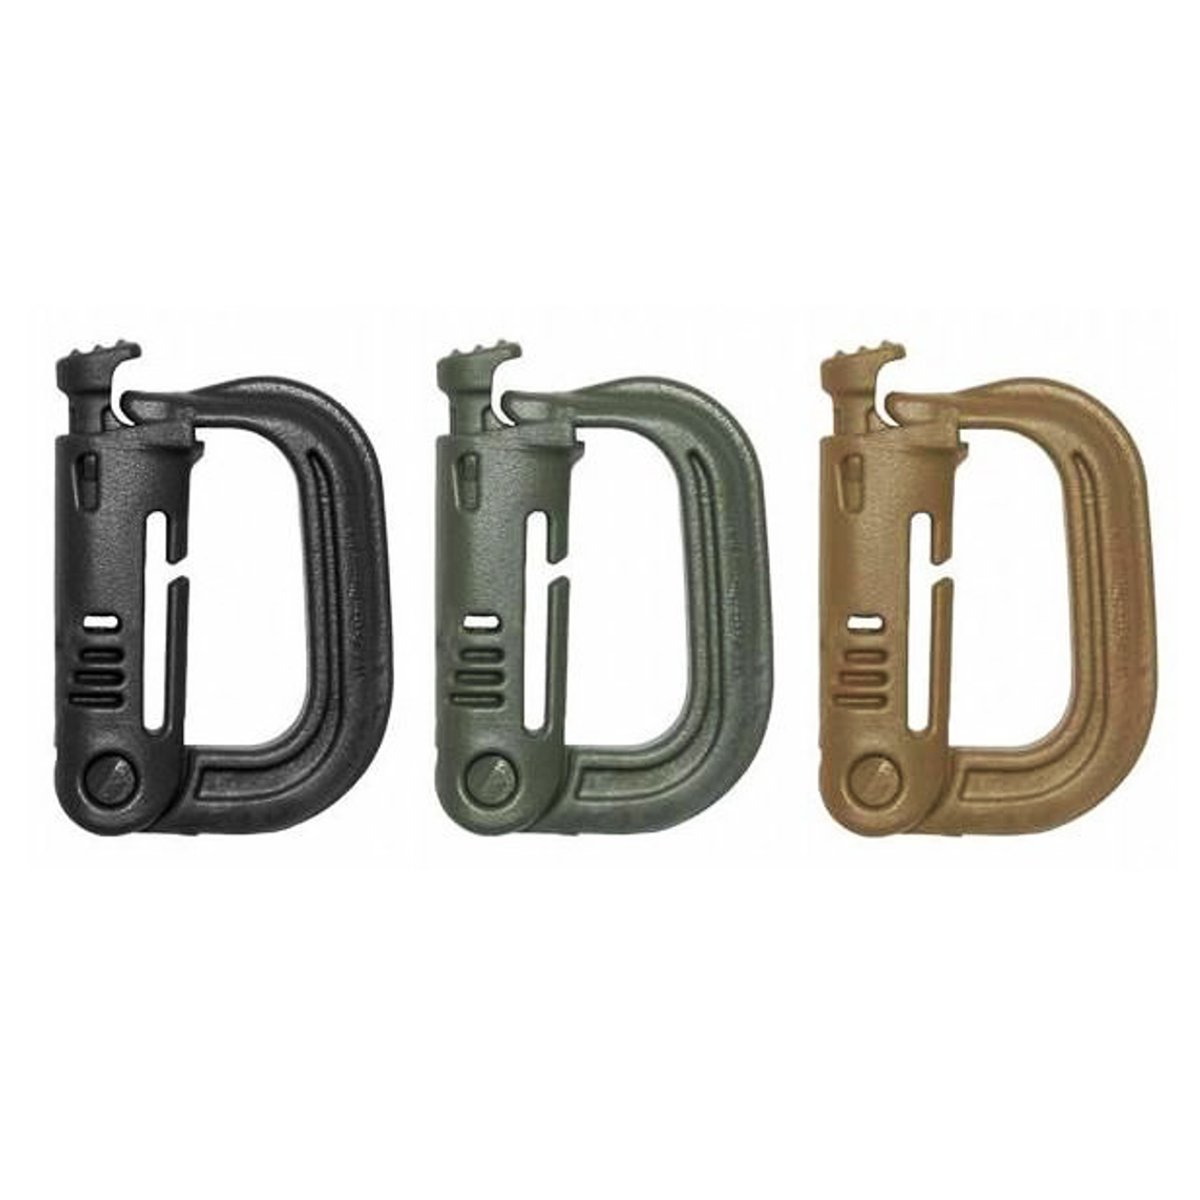 CAMTOA-Max-Load-90kg-D-Ring-Hook-Mountaineering-Buckle-Key-Chain-Outdoor-Climbing-Carabiner-Tactical-1885104-2